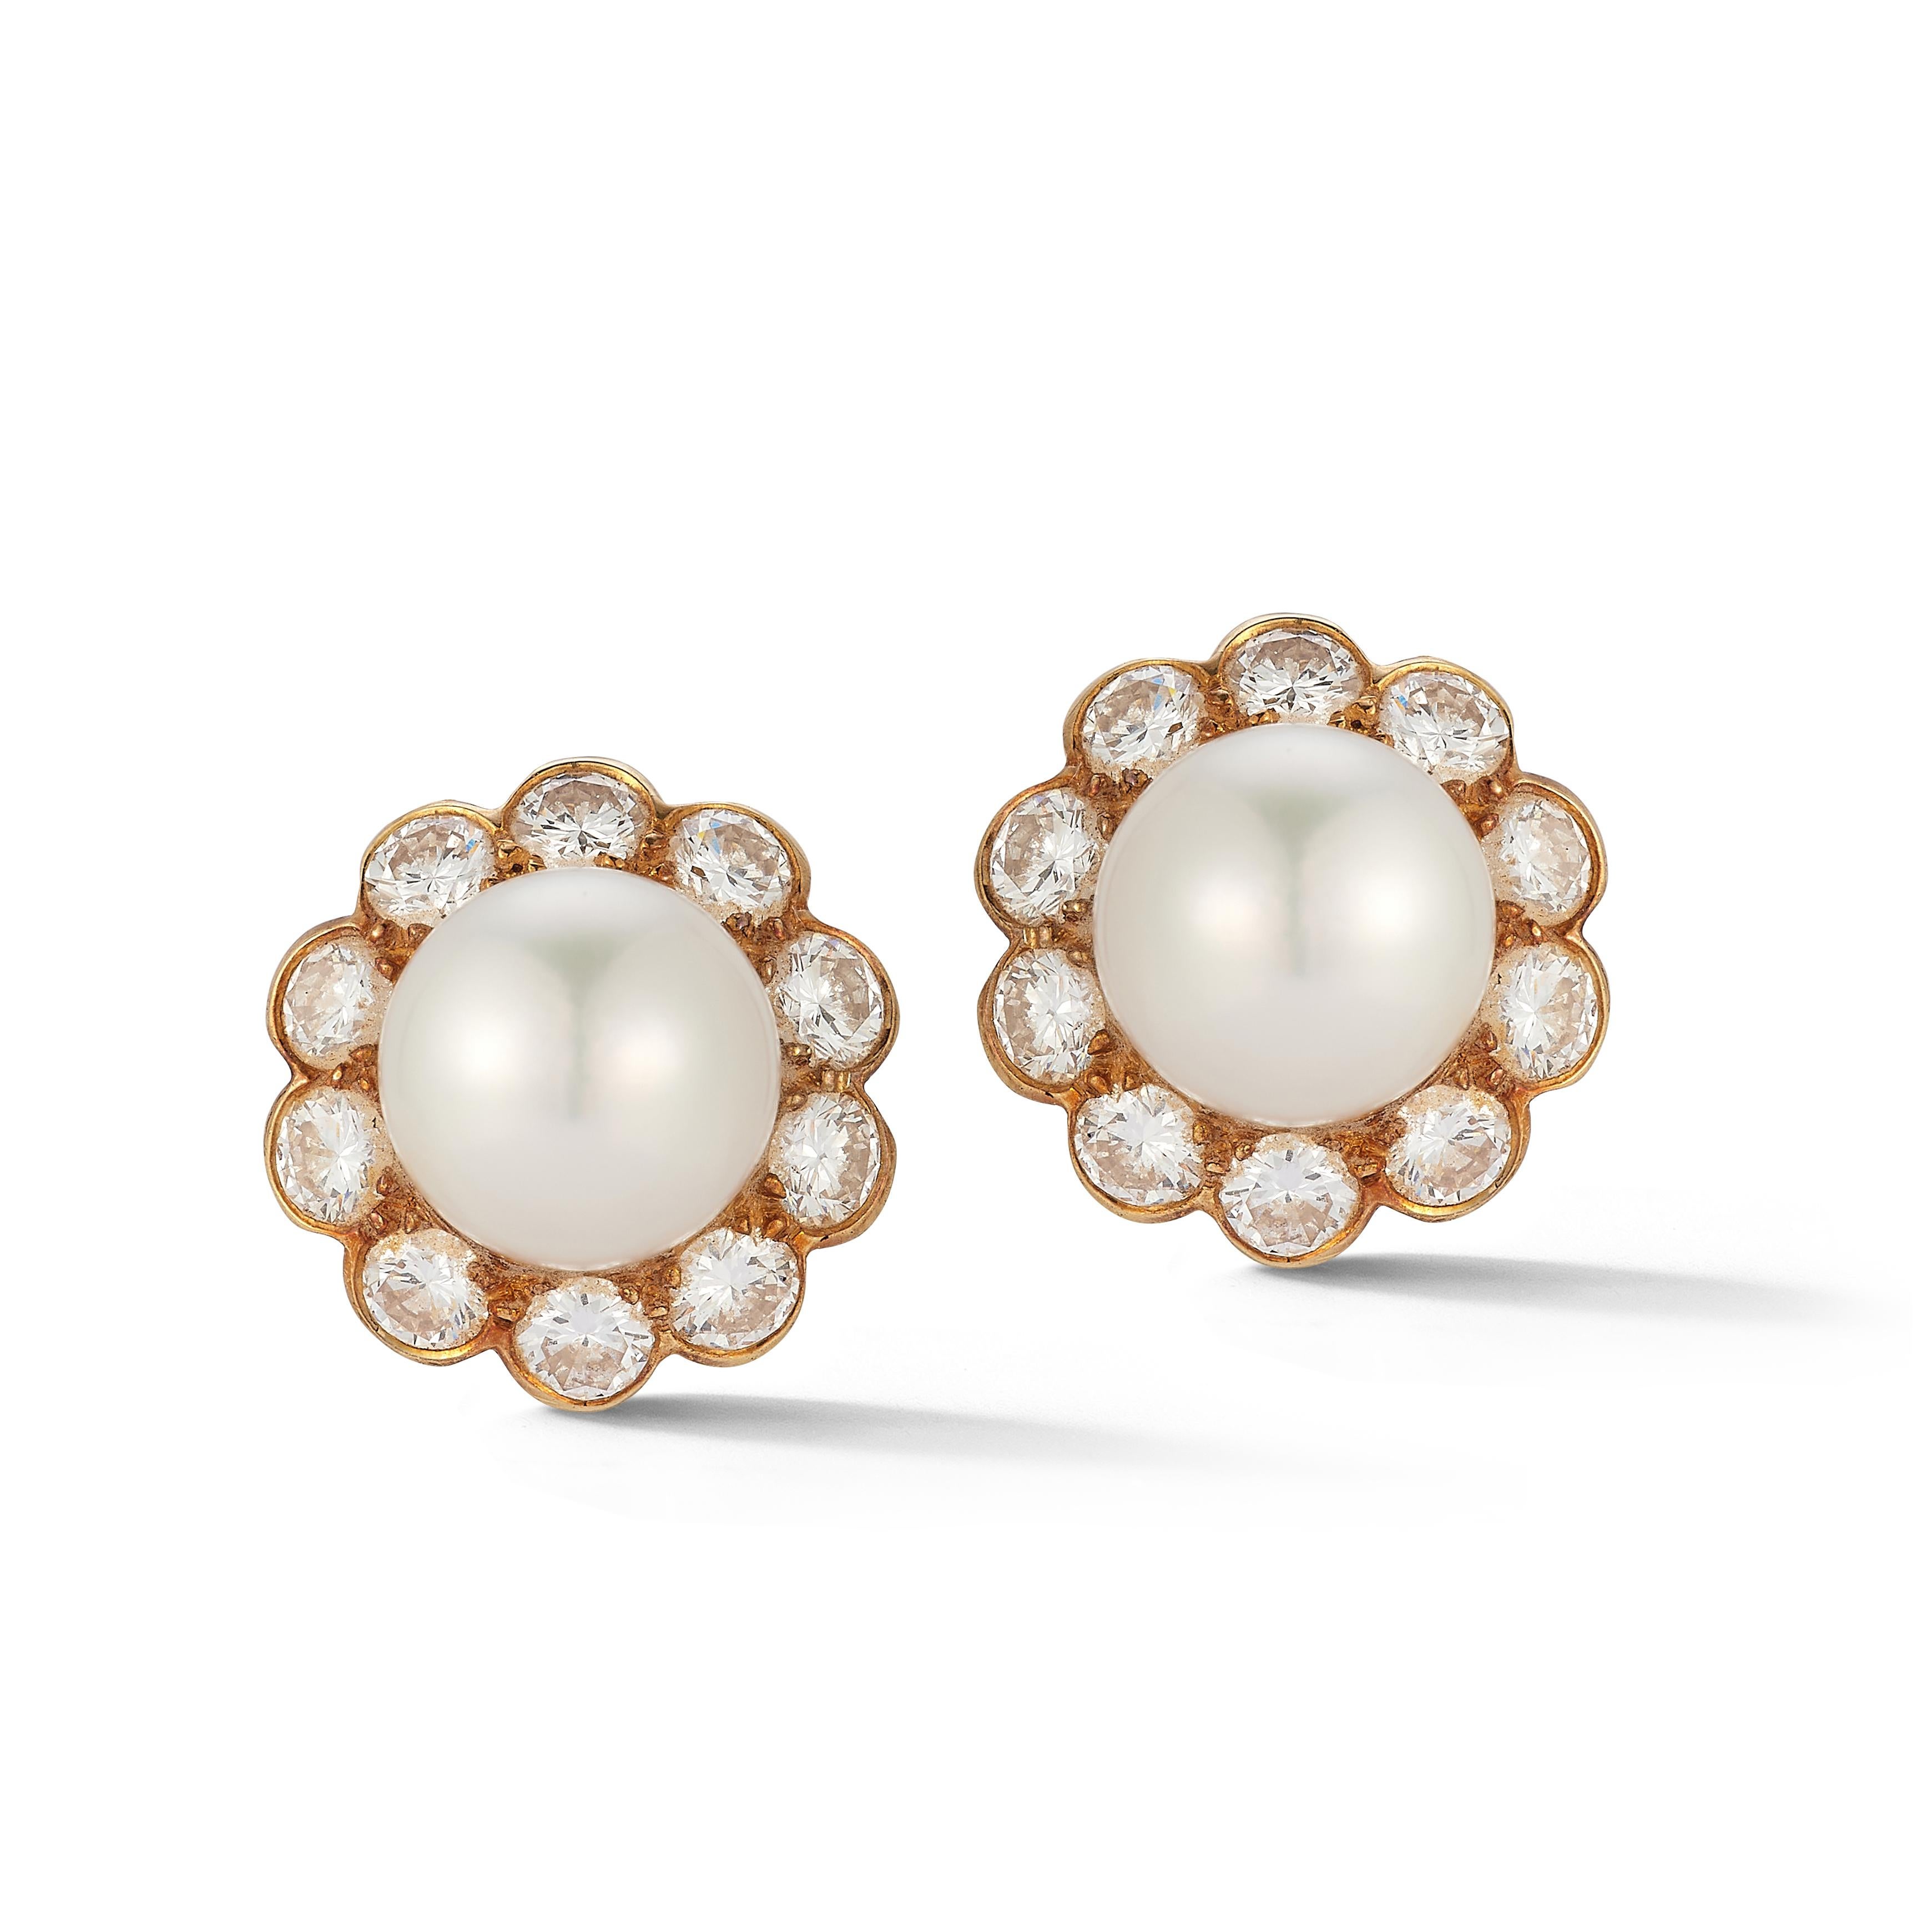 Van Cleef & Arpels Pearl & Diamond Earrings

 A pair of earrings consisting of 1 center pearl surrounded by round cut diamonds forming a flower motif.

Measurements: .50